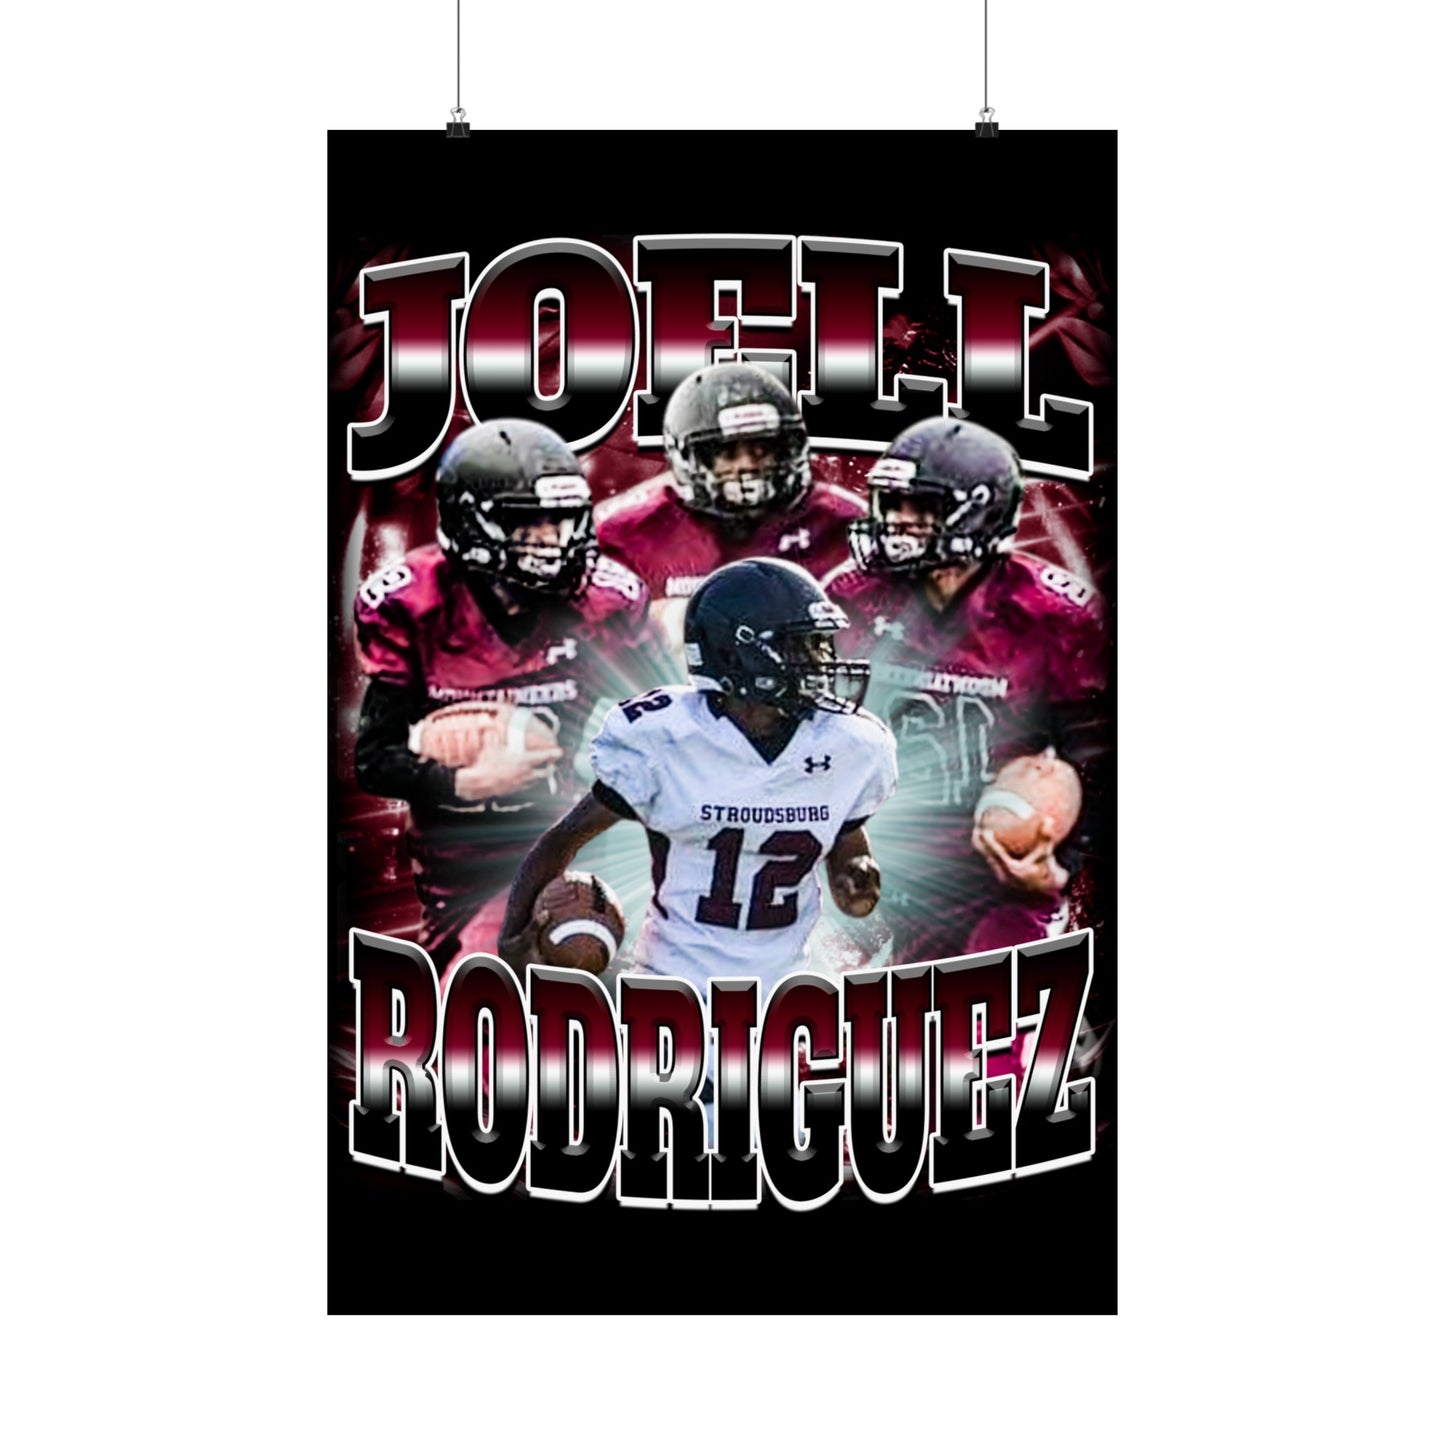 Joell Rodriguez Poster 24" x 36"